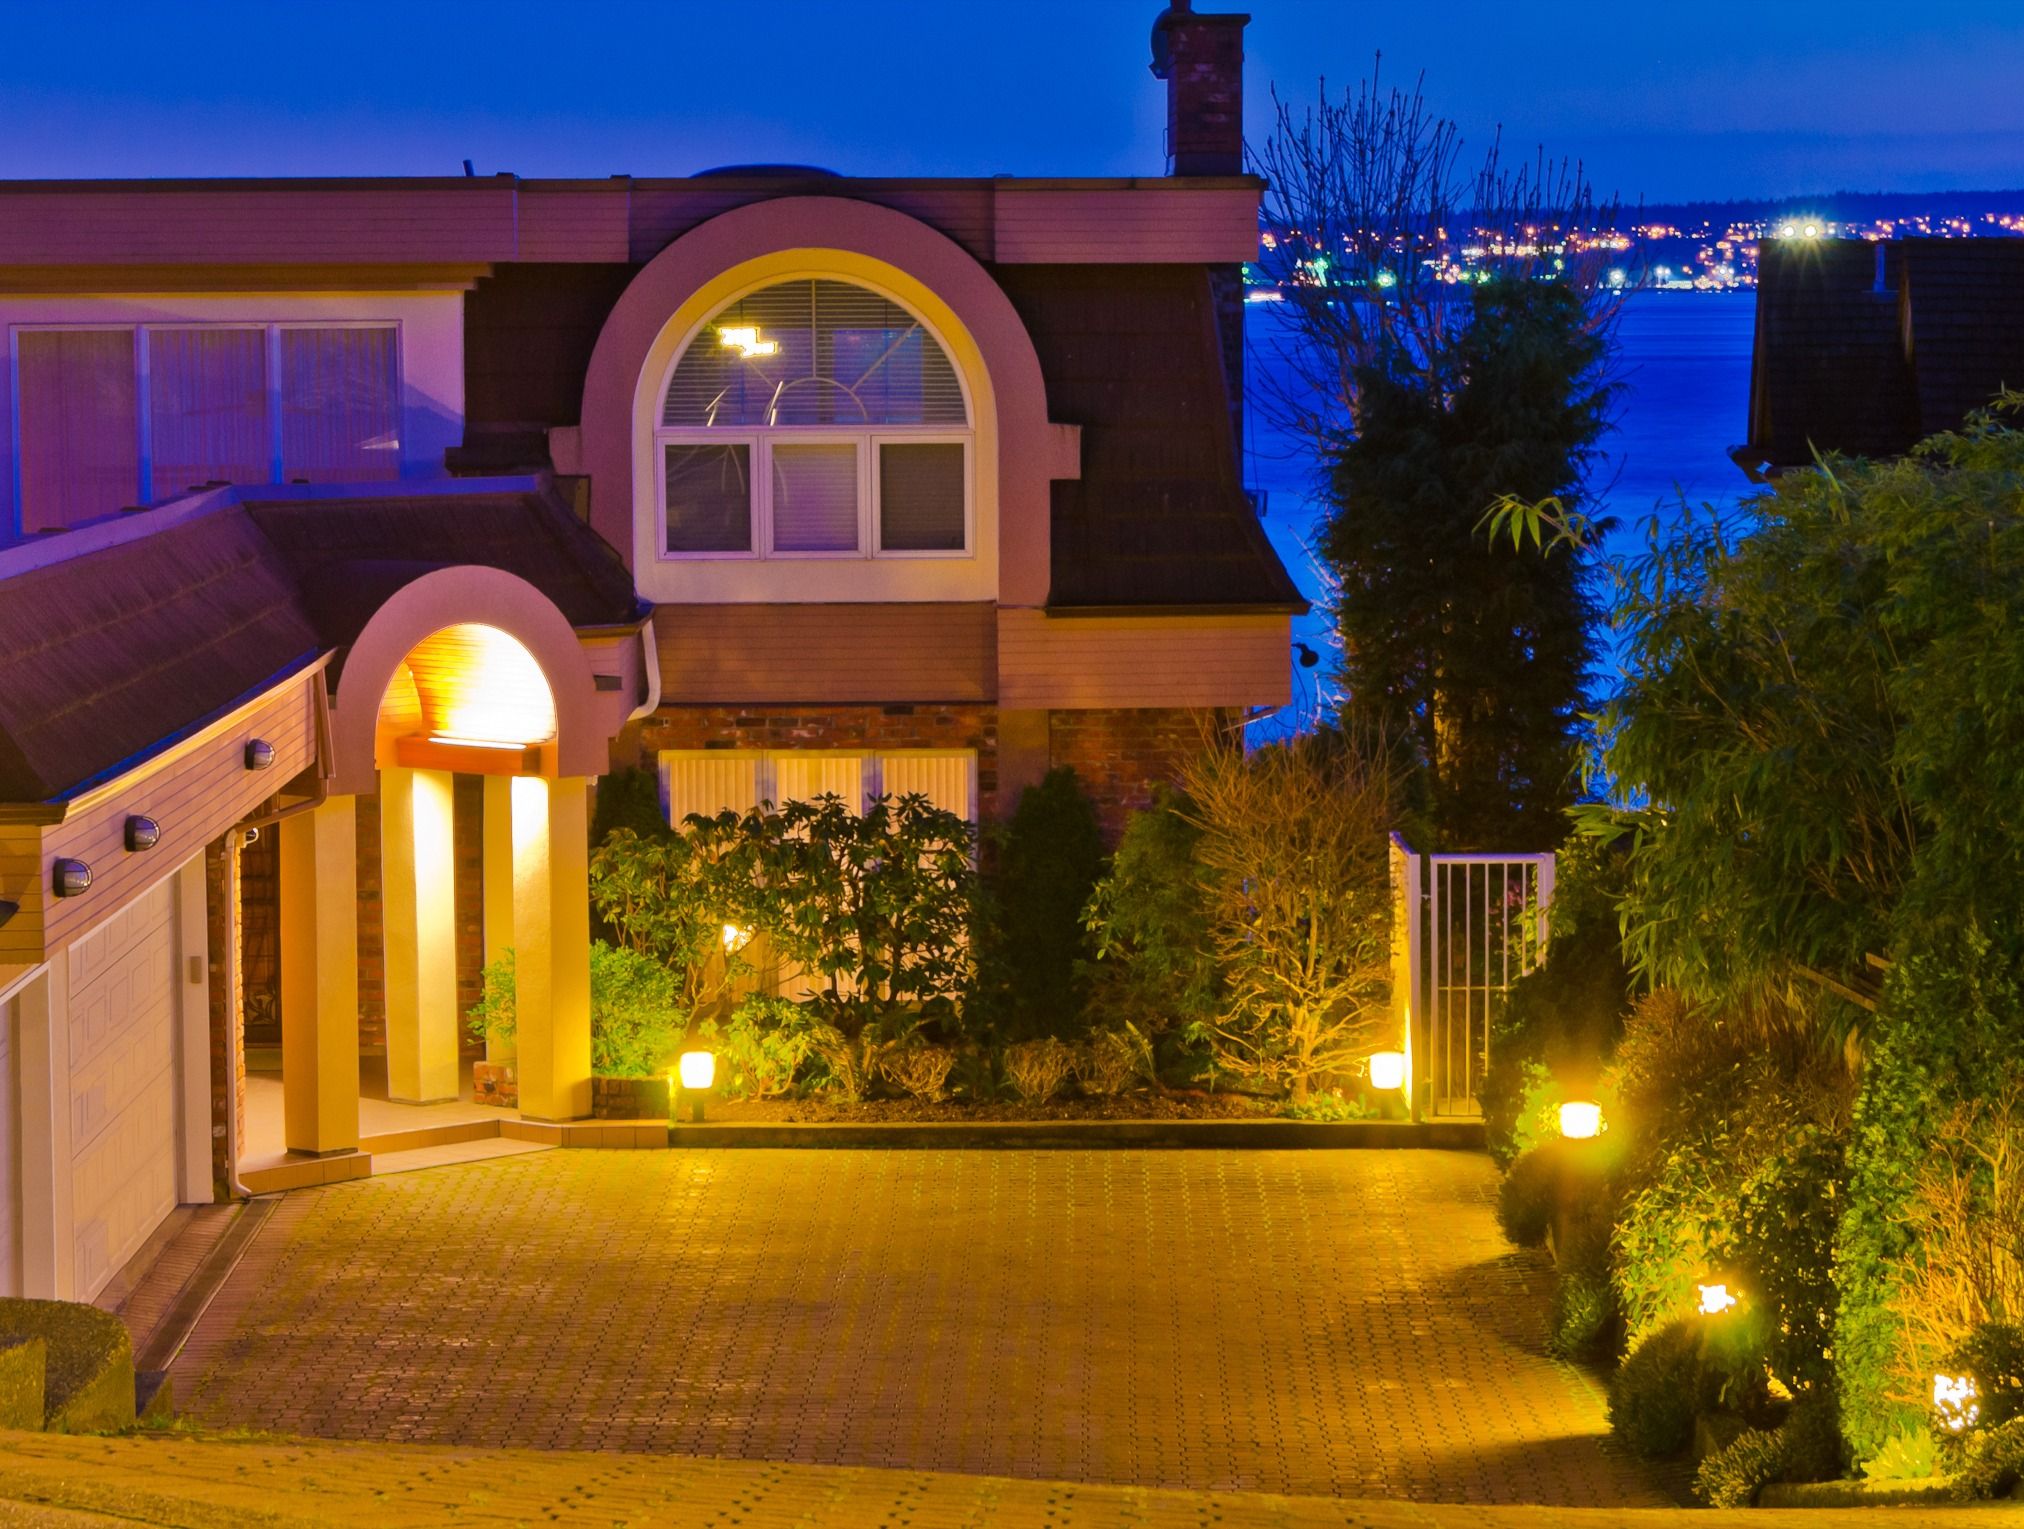 Luxury house with gorgeous night ocean view in Vancouver, Canada with illuminated driveway